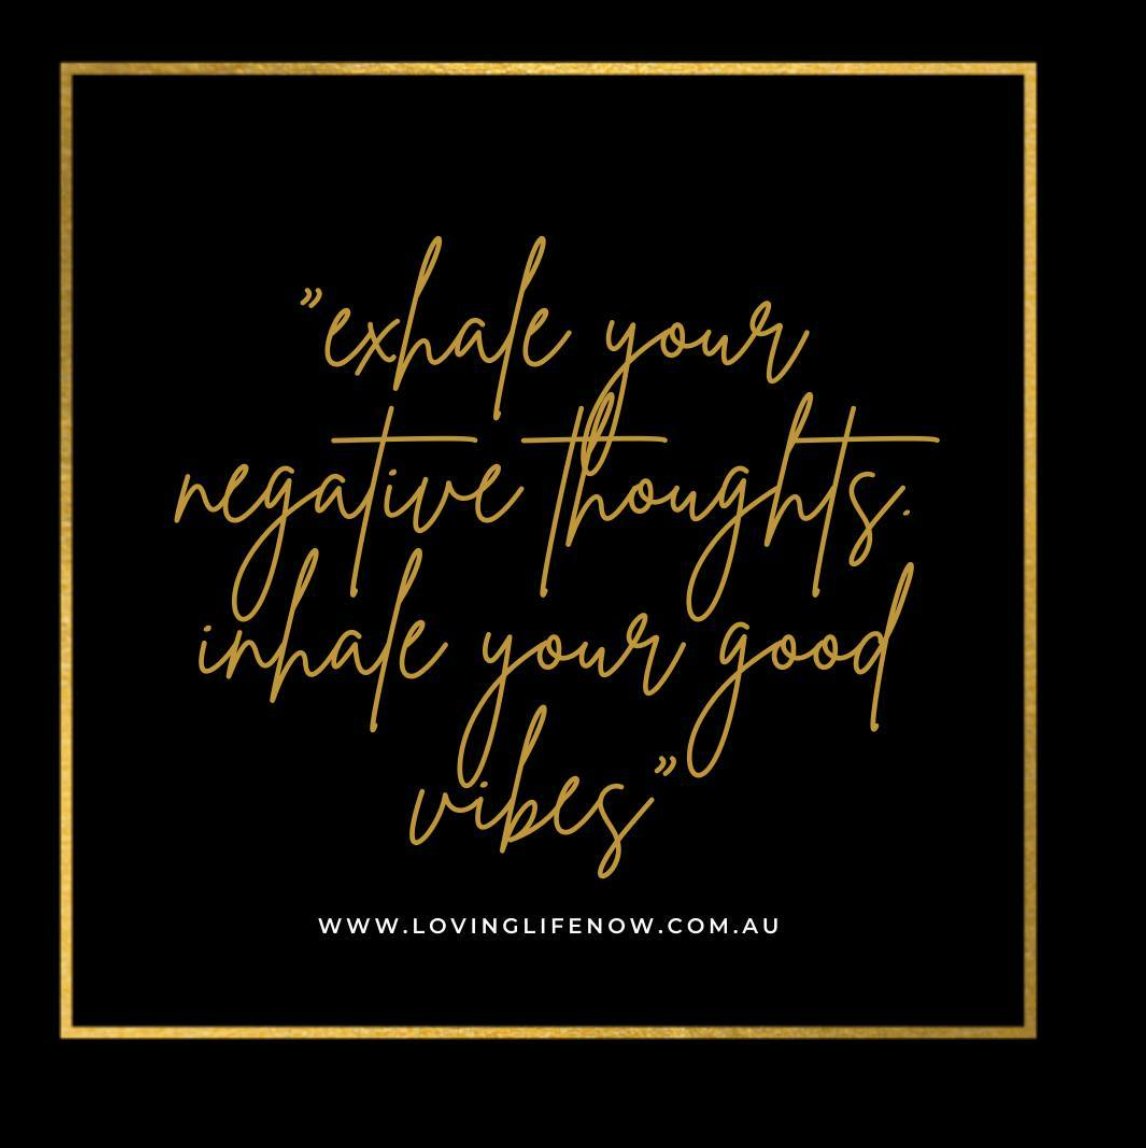 Exhale your negative thoughts inhale your good vibes
-
-
#LivingLovingLife
#OnlineIncomeOpportunity #WorkFromAnywhere #OnlineBusinessSolution
#SimonAndLeeAnne #LifestyleLoveAndBeyond
#LaptopLifestyle #PortableOnlineBusiness
#SimonHaggard #LeeAnneHaggard #LovingLifeNow